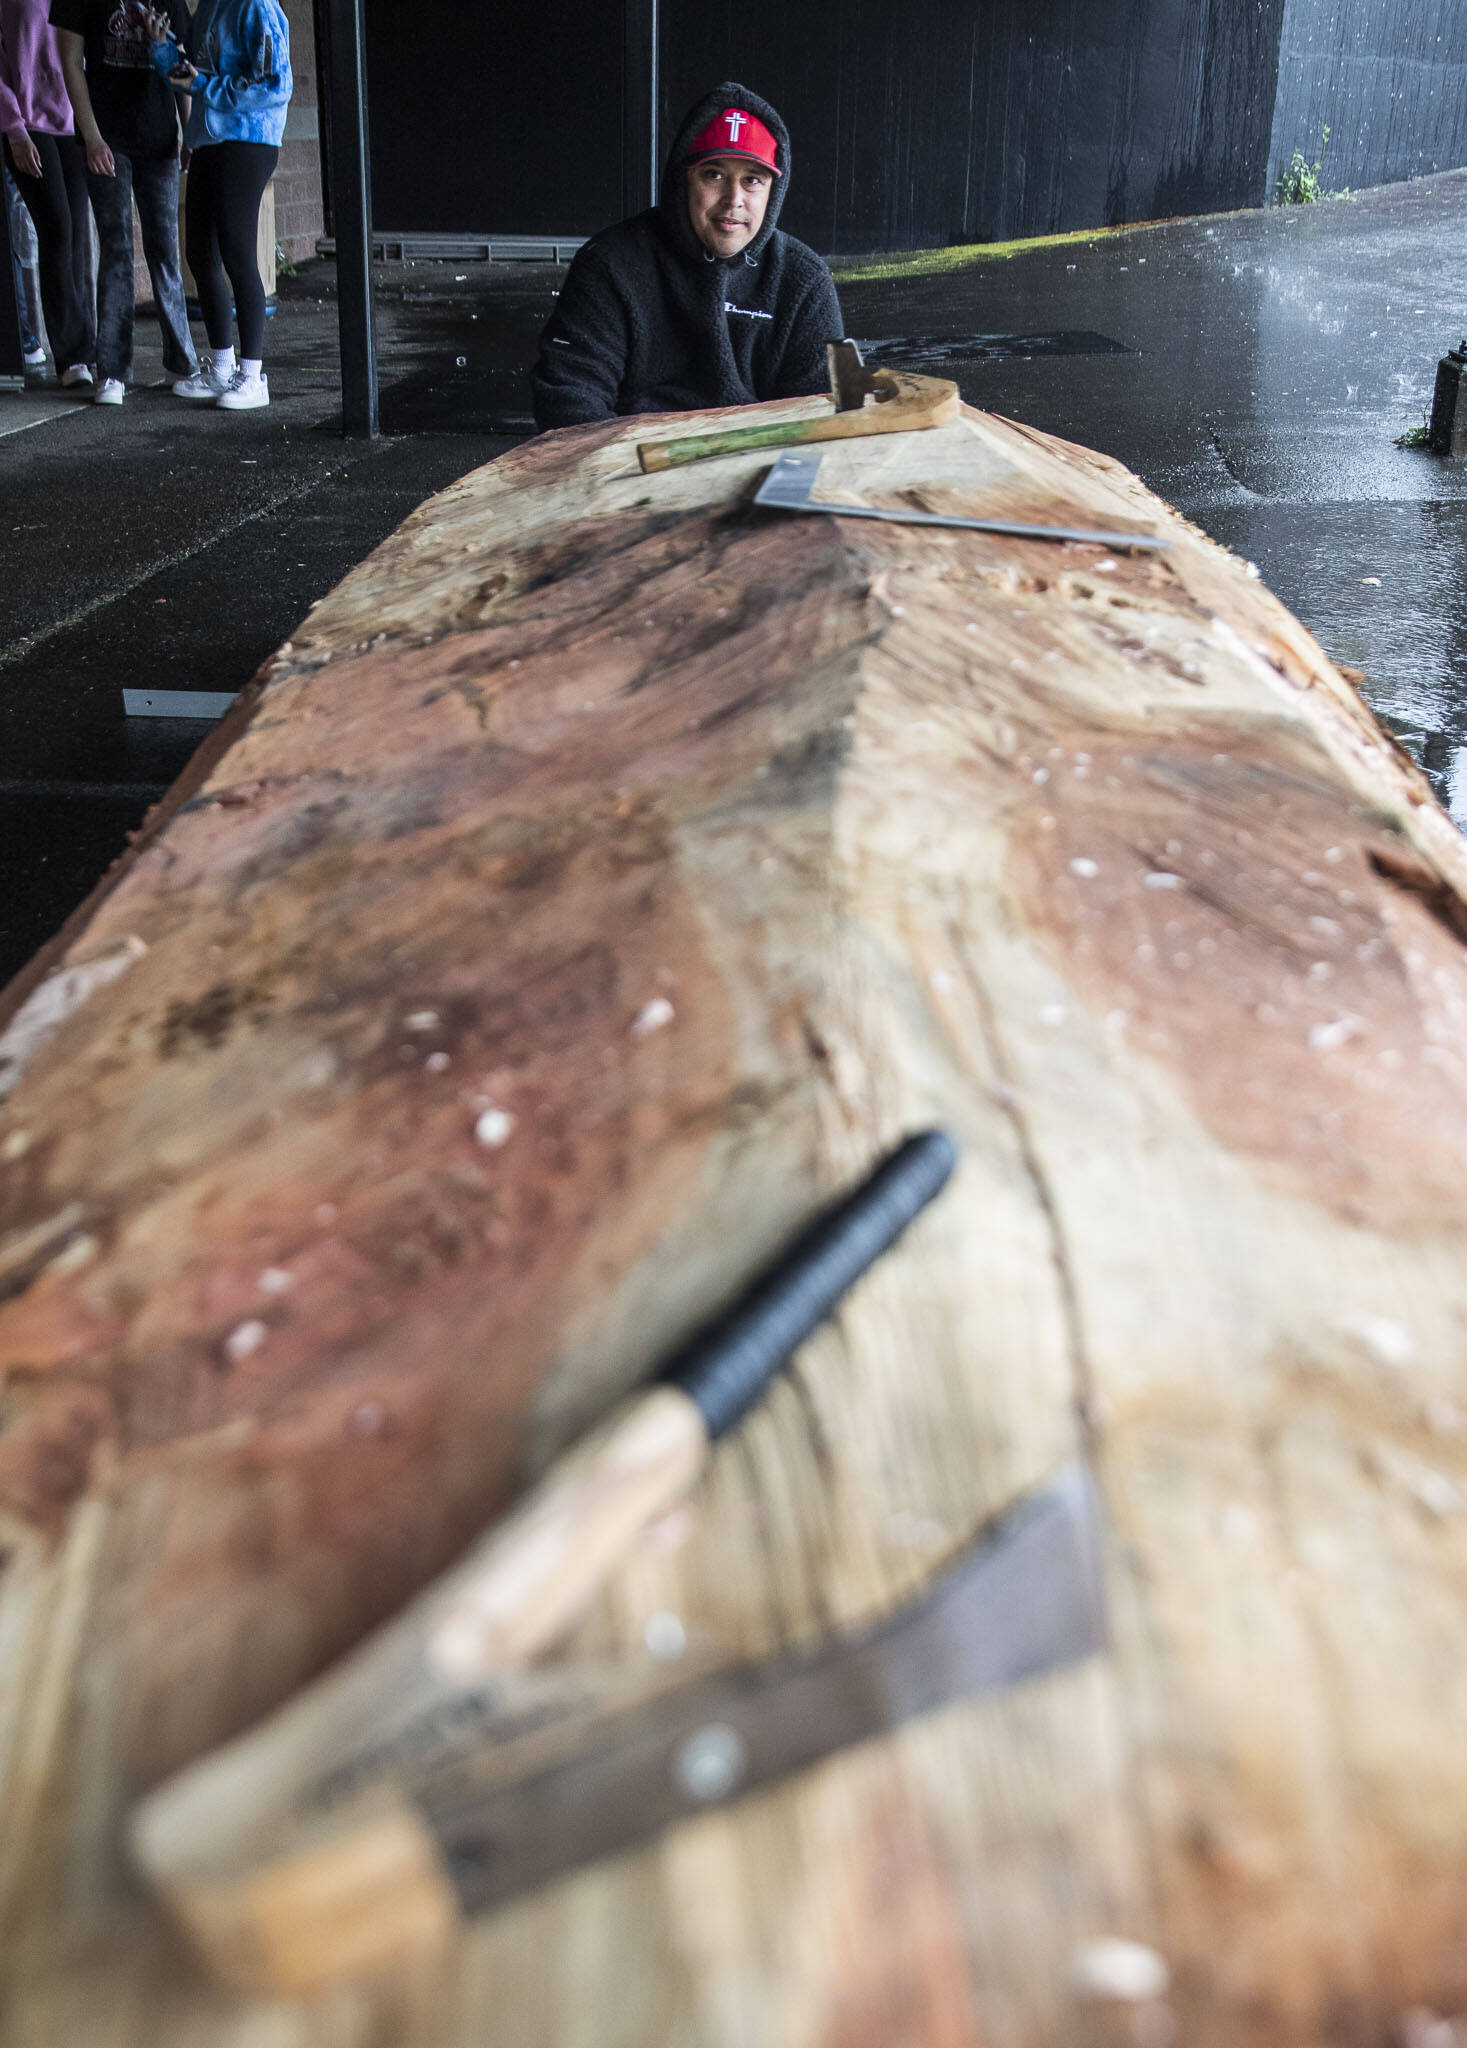 Artist James Madison, who will take the lead on the carving looks across the 12 foot piece of wood on Friday, May 5, 2023 in Everett, Washington. (Olivia Vanni / The Herald)